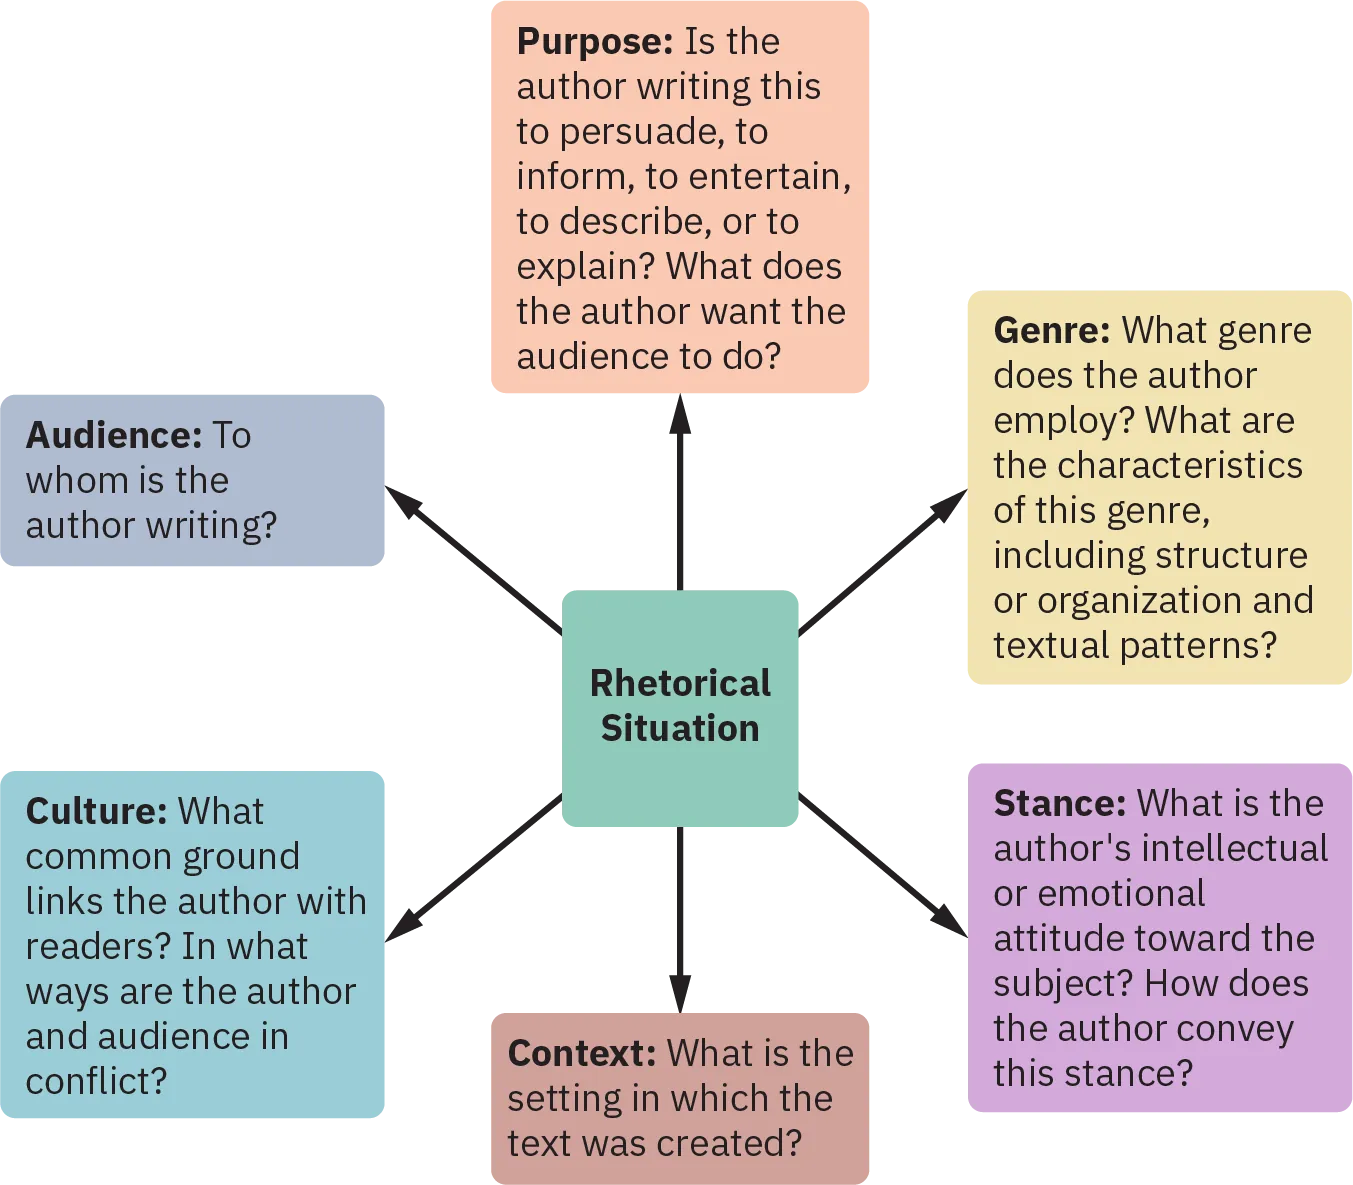 A multi-colored web diagram shows a center square that reads “Rhetorical Situation.” Six radiating squares describe “Audience,” “Purpose,” “Genre,” “Stance,” “Context,” and “Culture.”